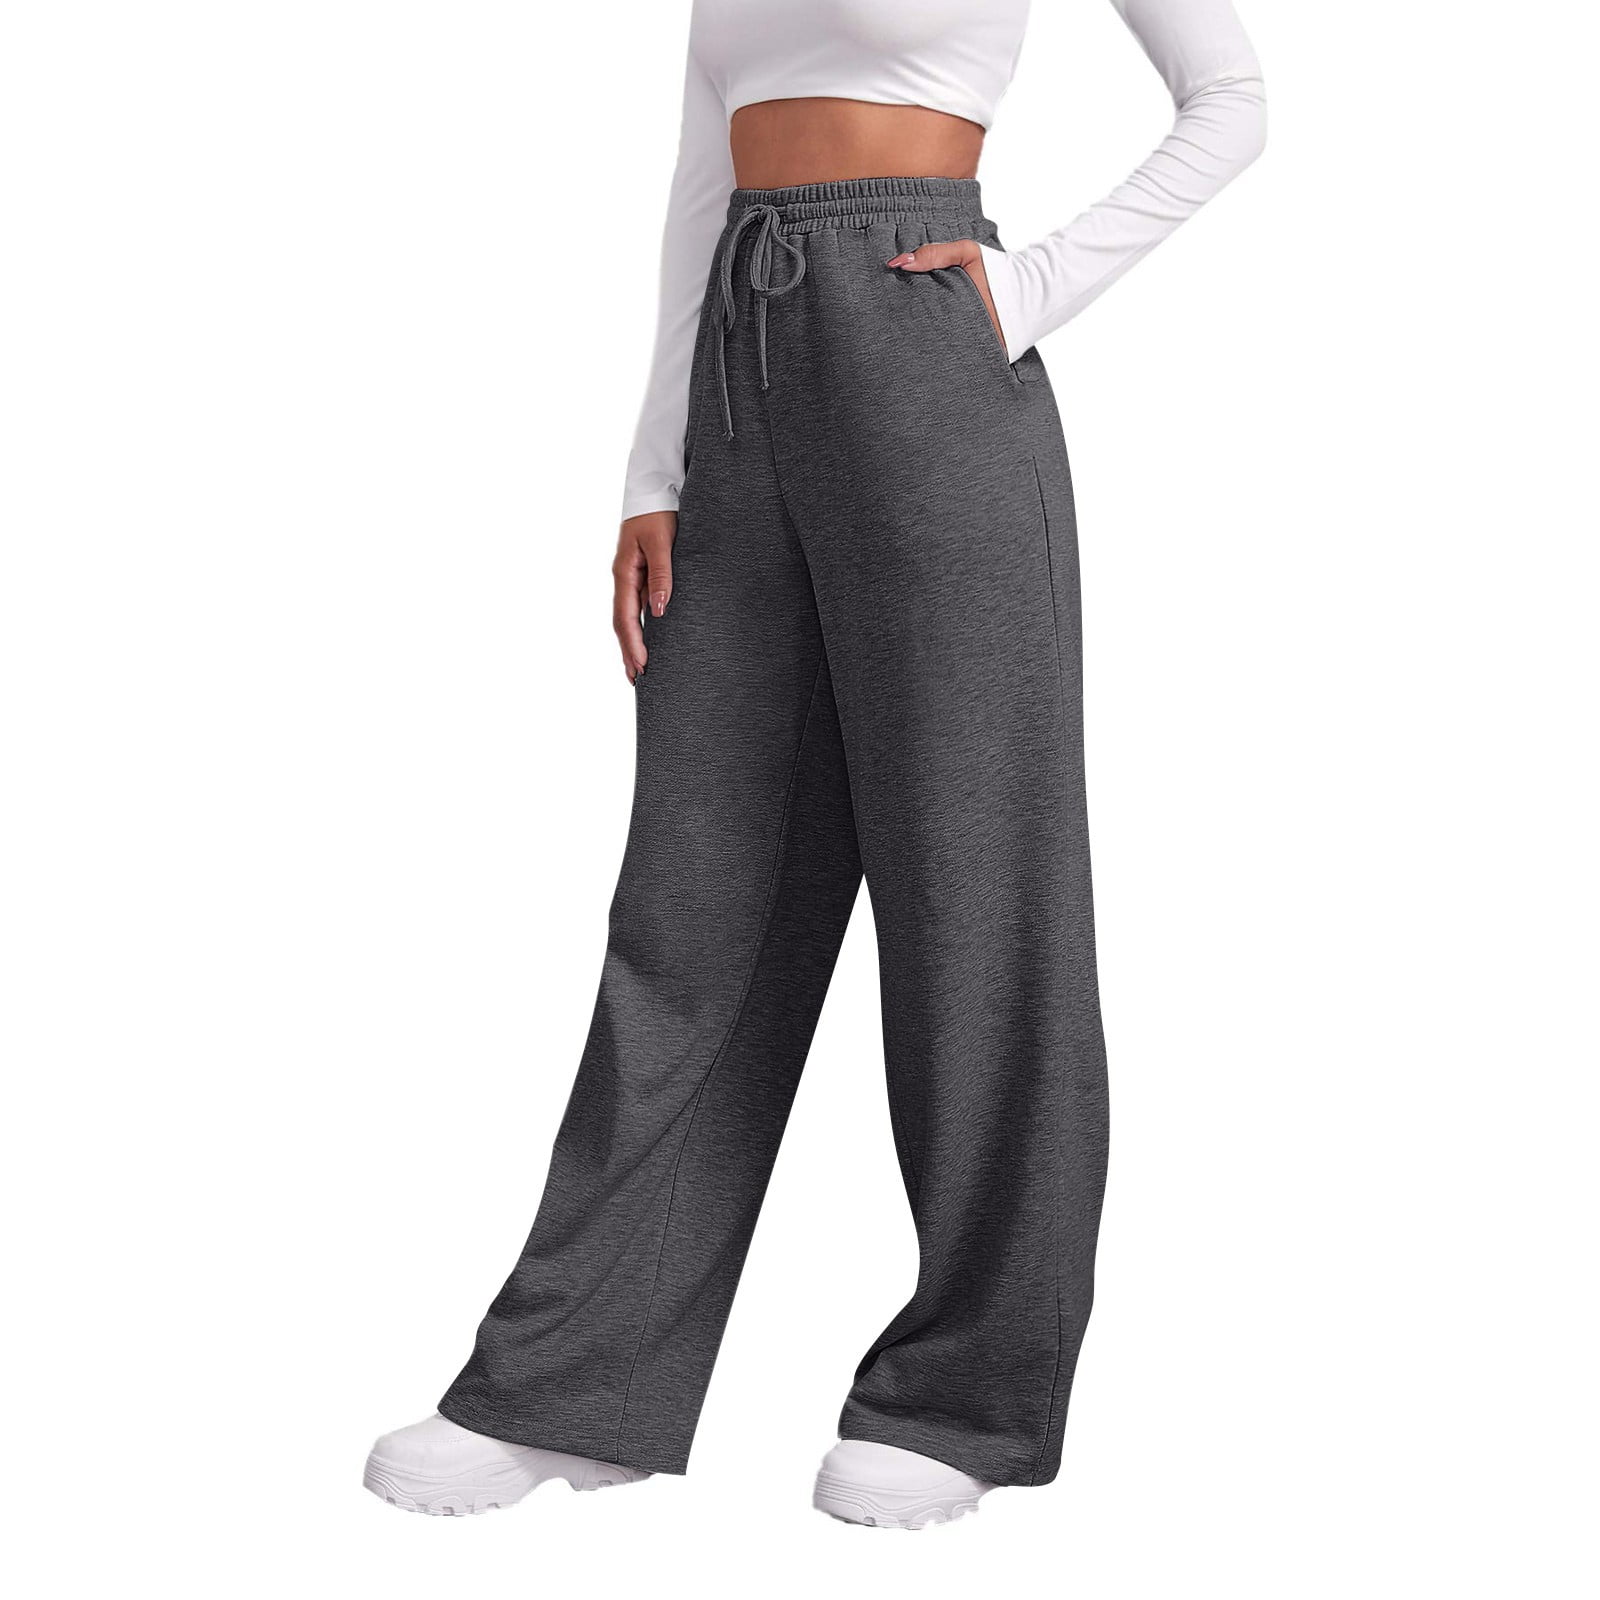 Susanny Athletic Works Girls Sweatpants Wide Leg High Waisted Drawstring  Pockets Sweatpants for Women Plus Size Clearance Trendy Fashion Baggy Pants  Teen Girls Joggers Jogger Pants Dark Gray S 